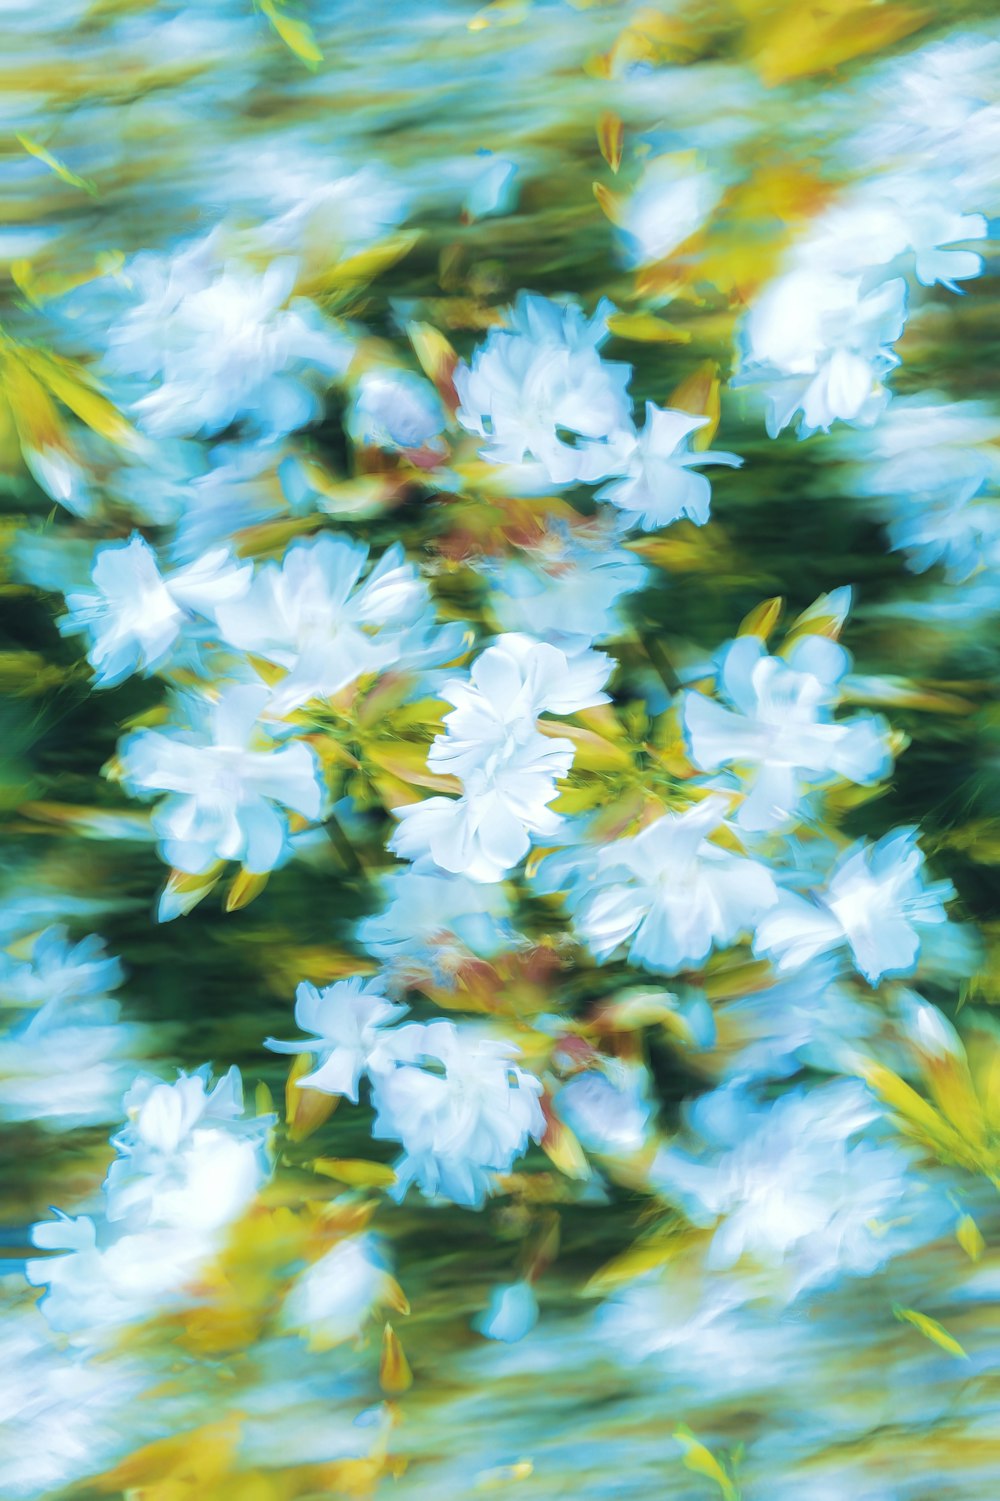 a blurry photo of a bunch of flowers